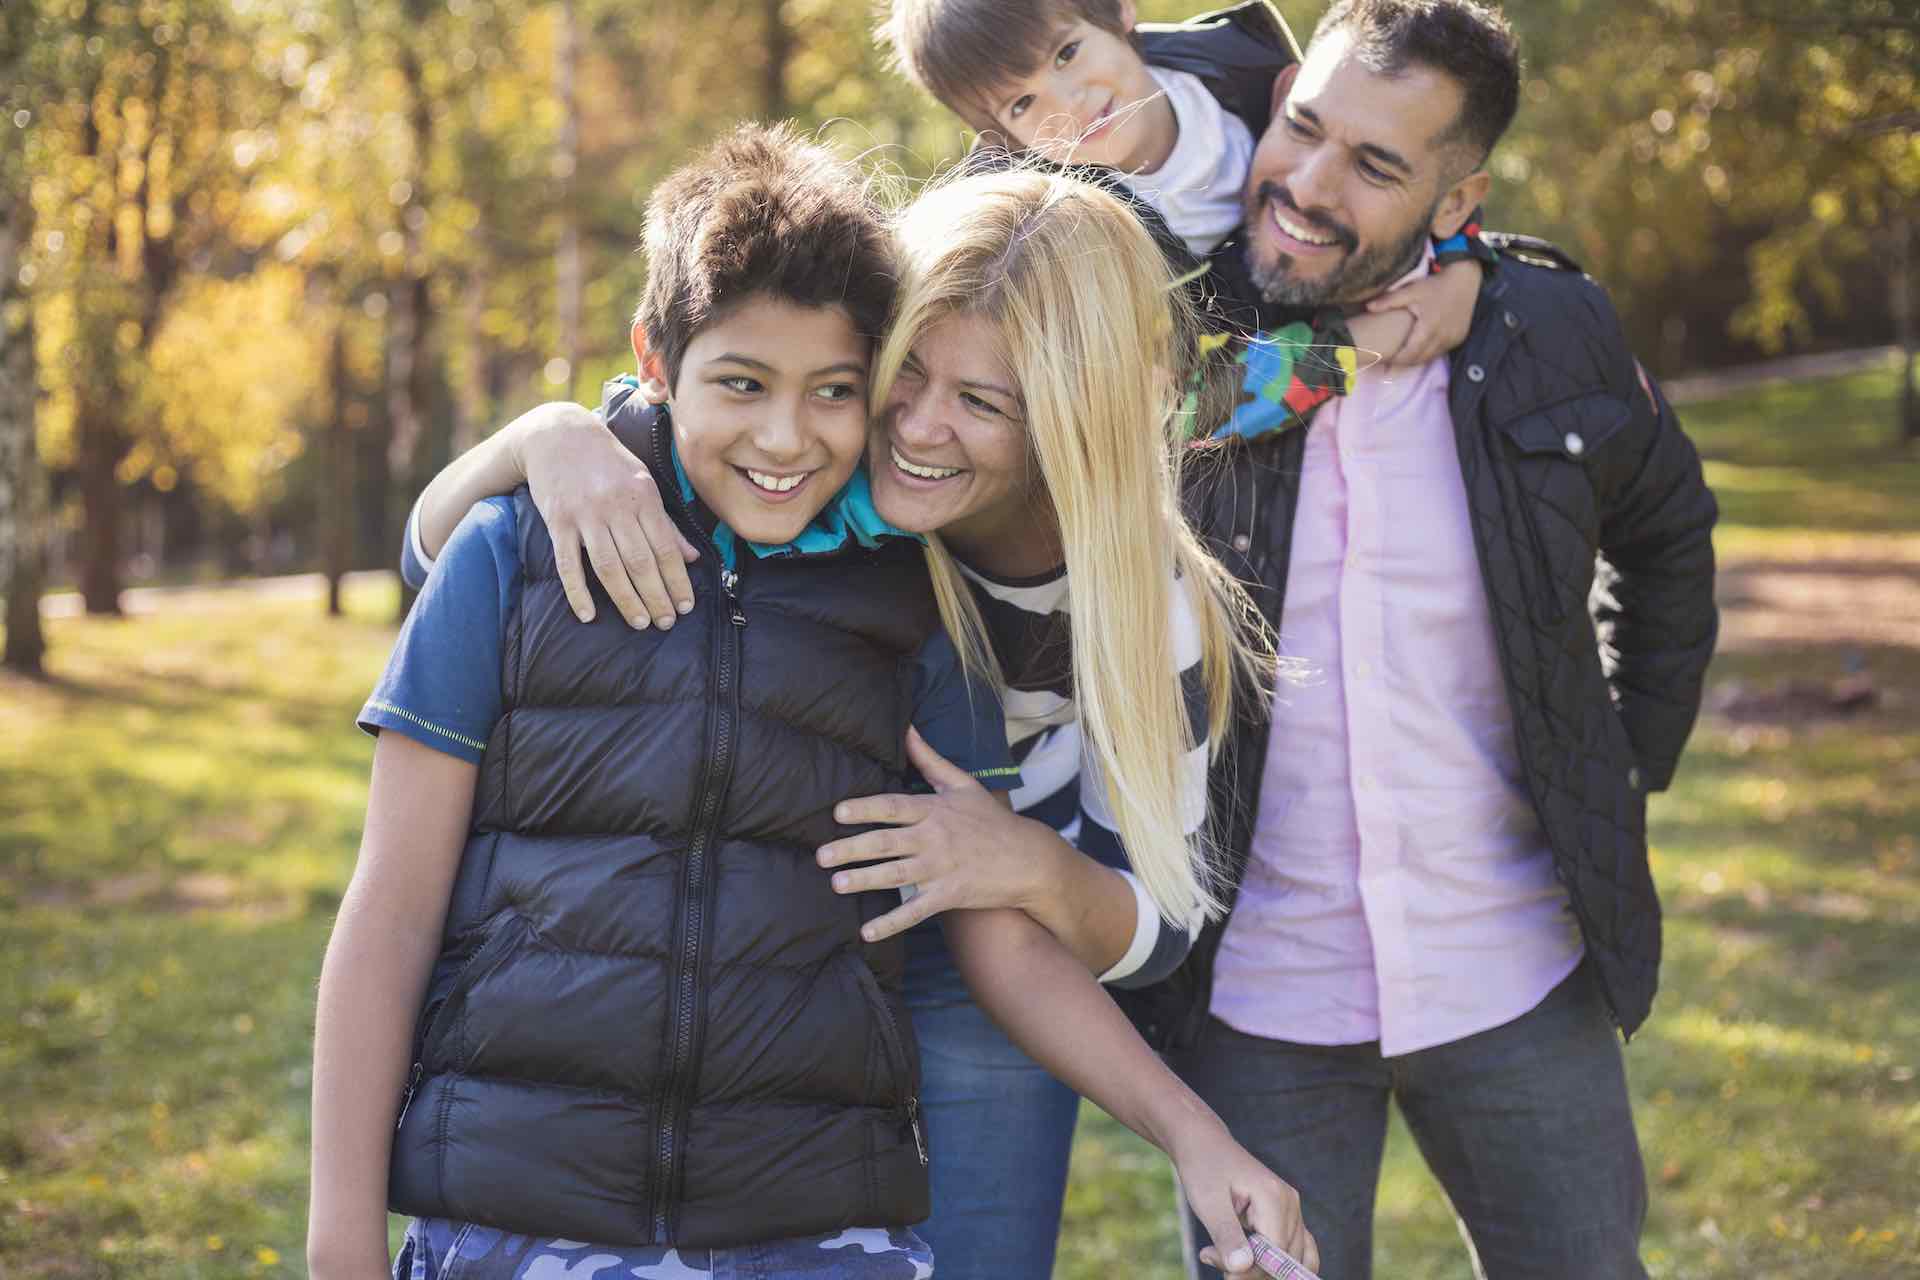 Two adults and two kids smiling in autumn scene outdoors